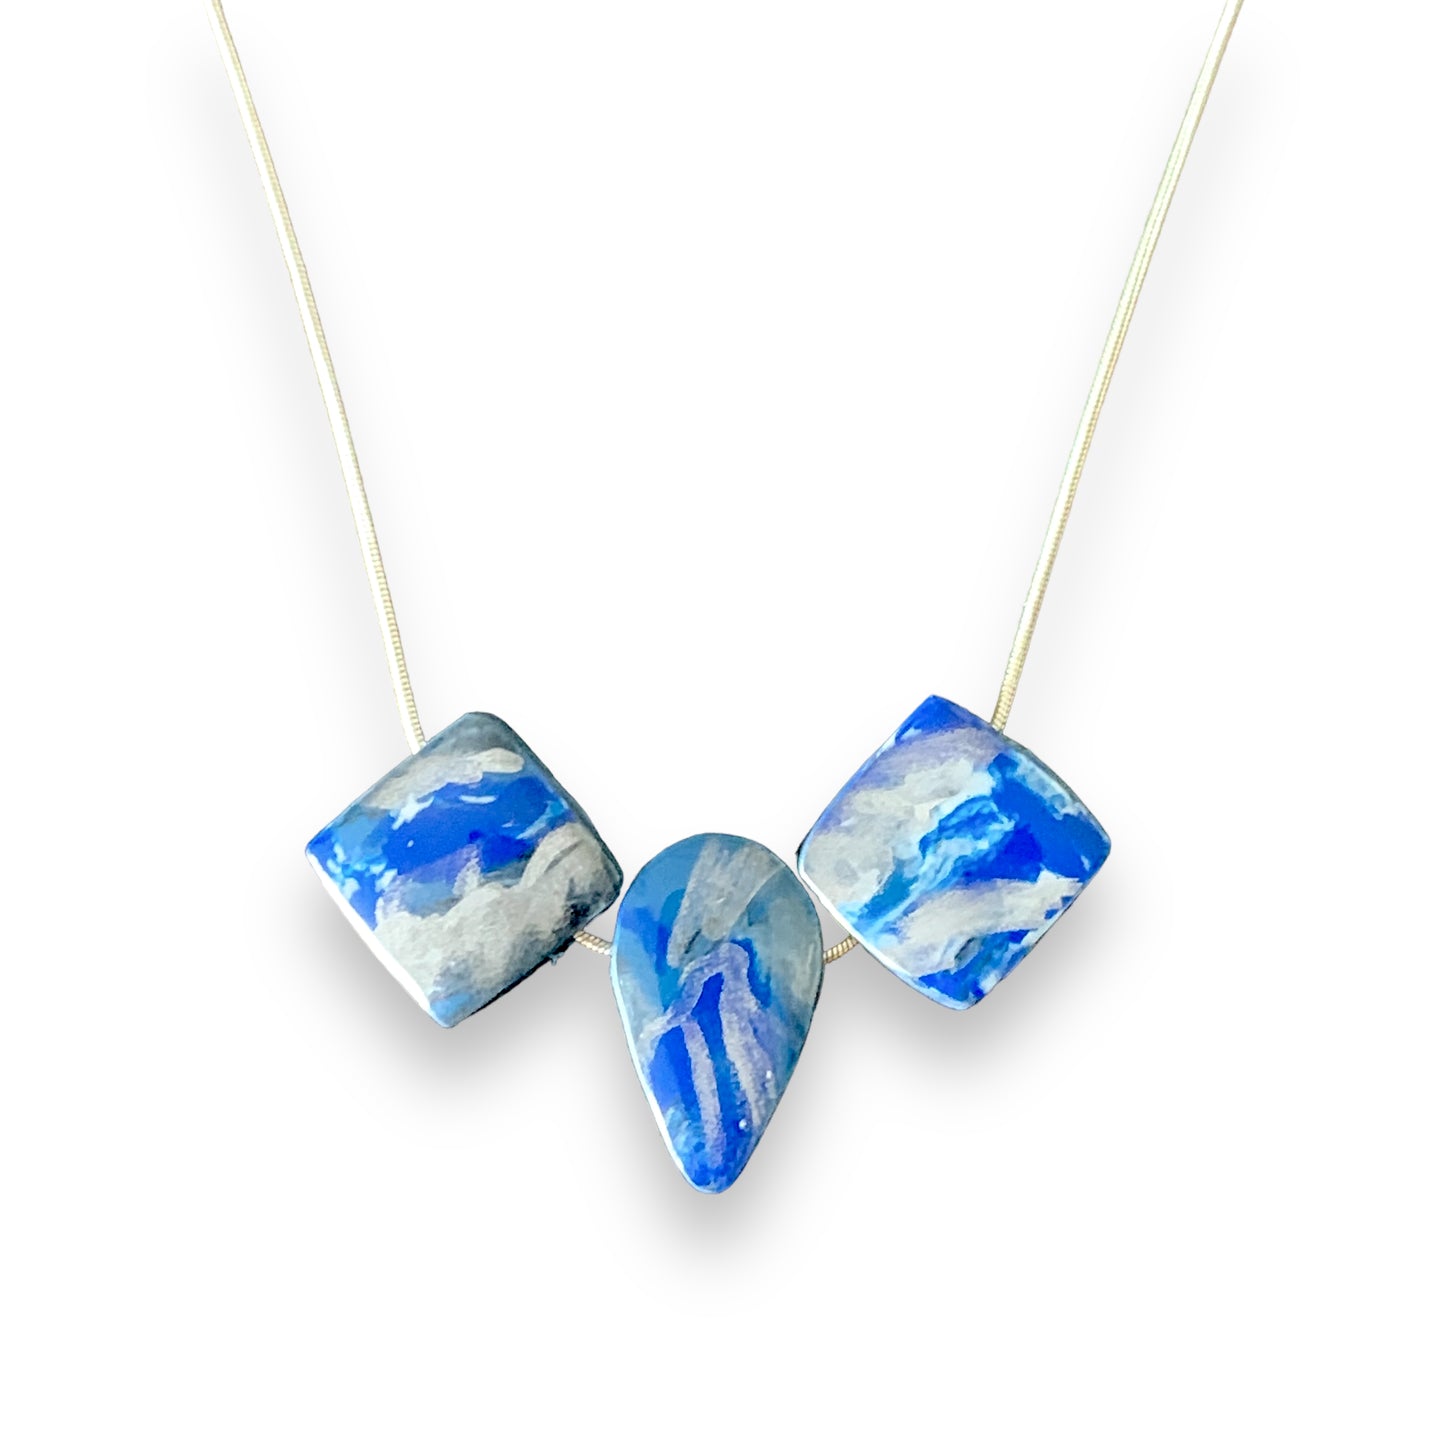 Blue necklace made from recycled plastic silver snake chain handmade in London perfect gift award 2023